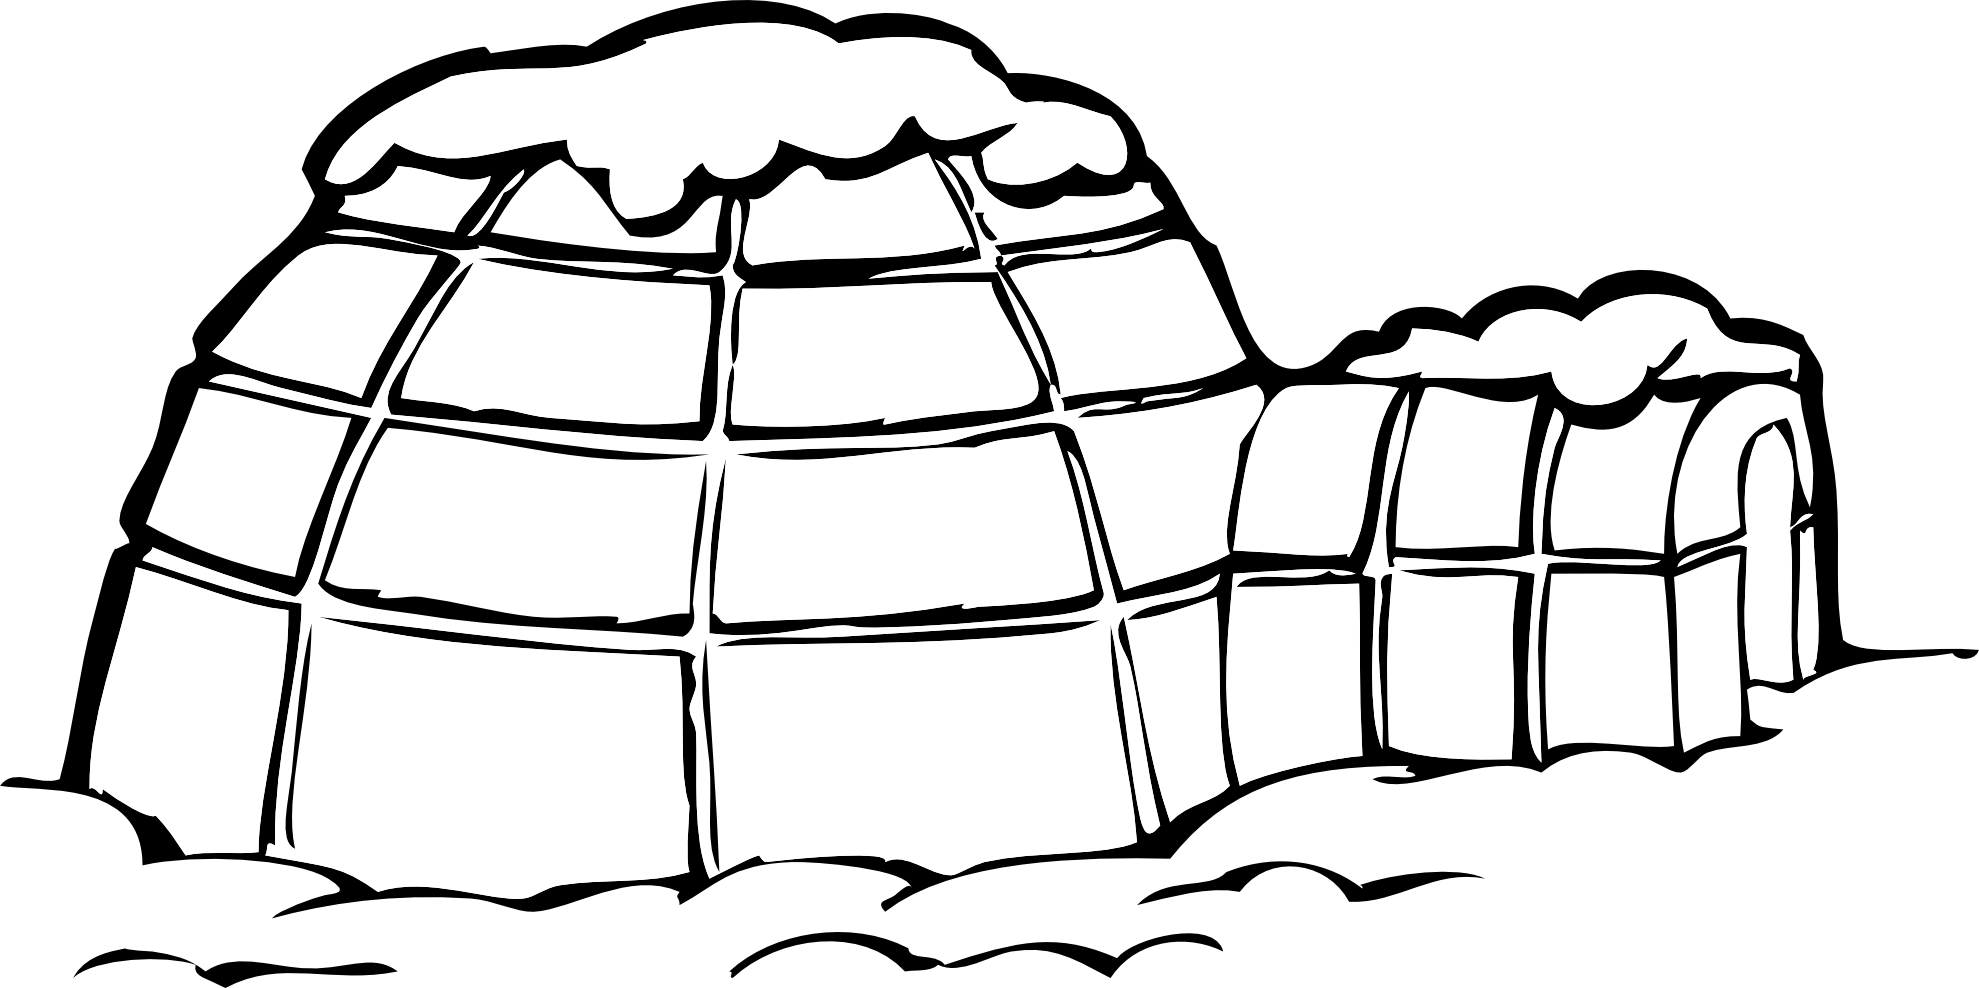 Igloo Clipart Black And White | Clipart library - Free Clipart Images